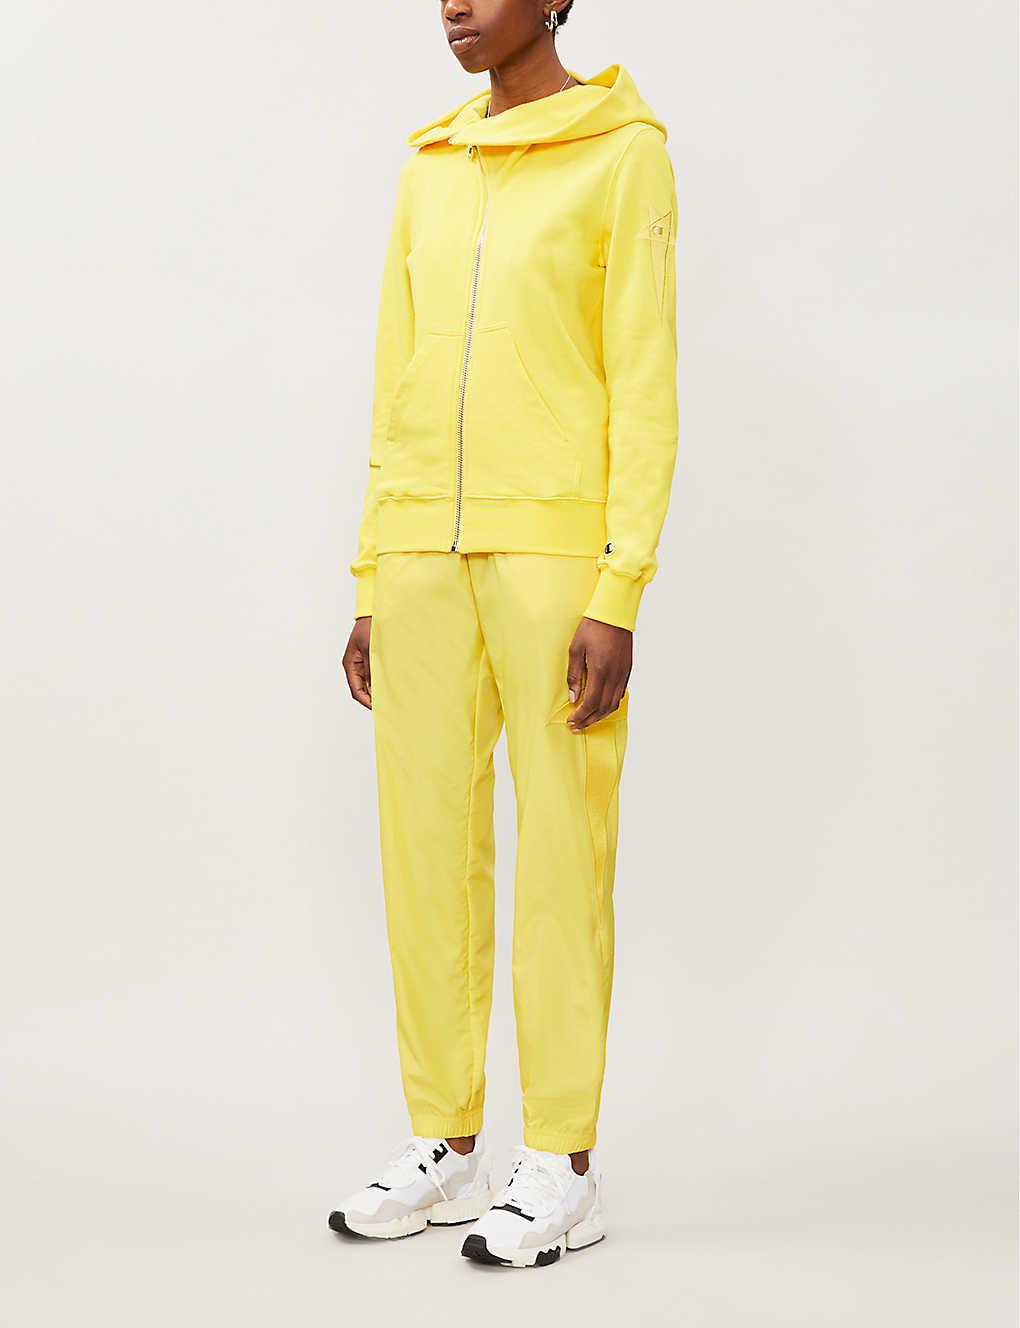 Rick Owens X Champion Logo-embroidered Cotton-blend Jersey Hoody in Yellow  | Lyst